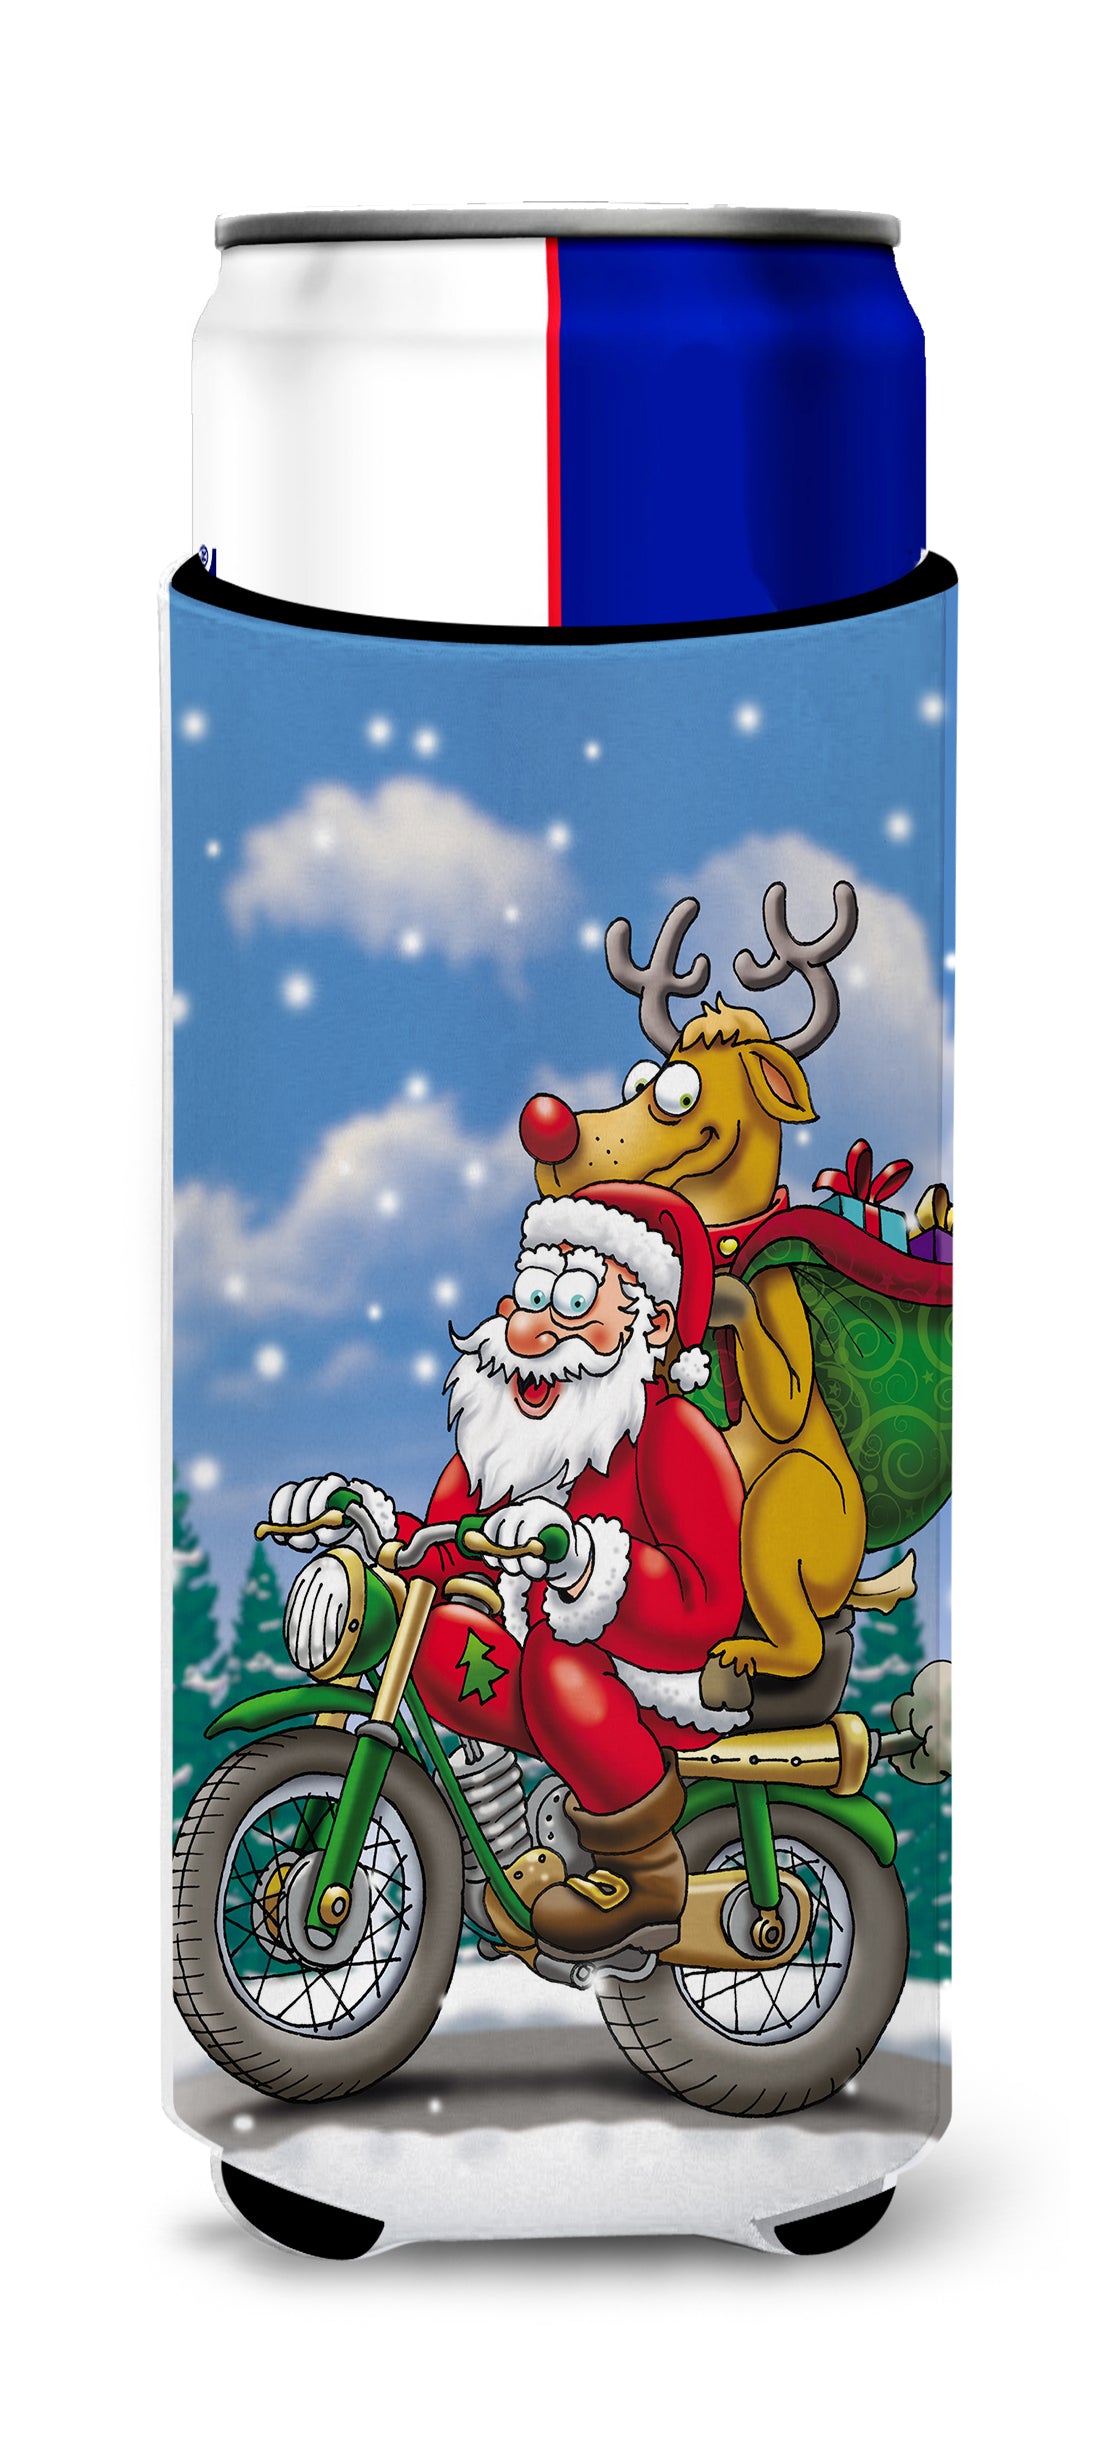 Christmas Santa Claus on a Motorcycle Ultra Beverage Insulators for slim cans APH8996MUK  the-store.com.